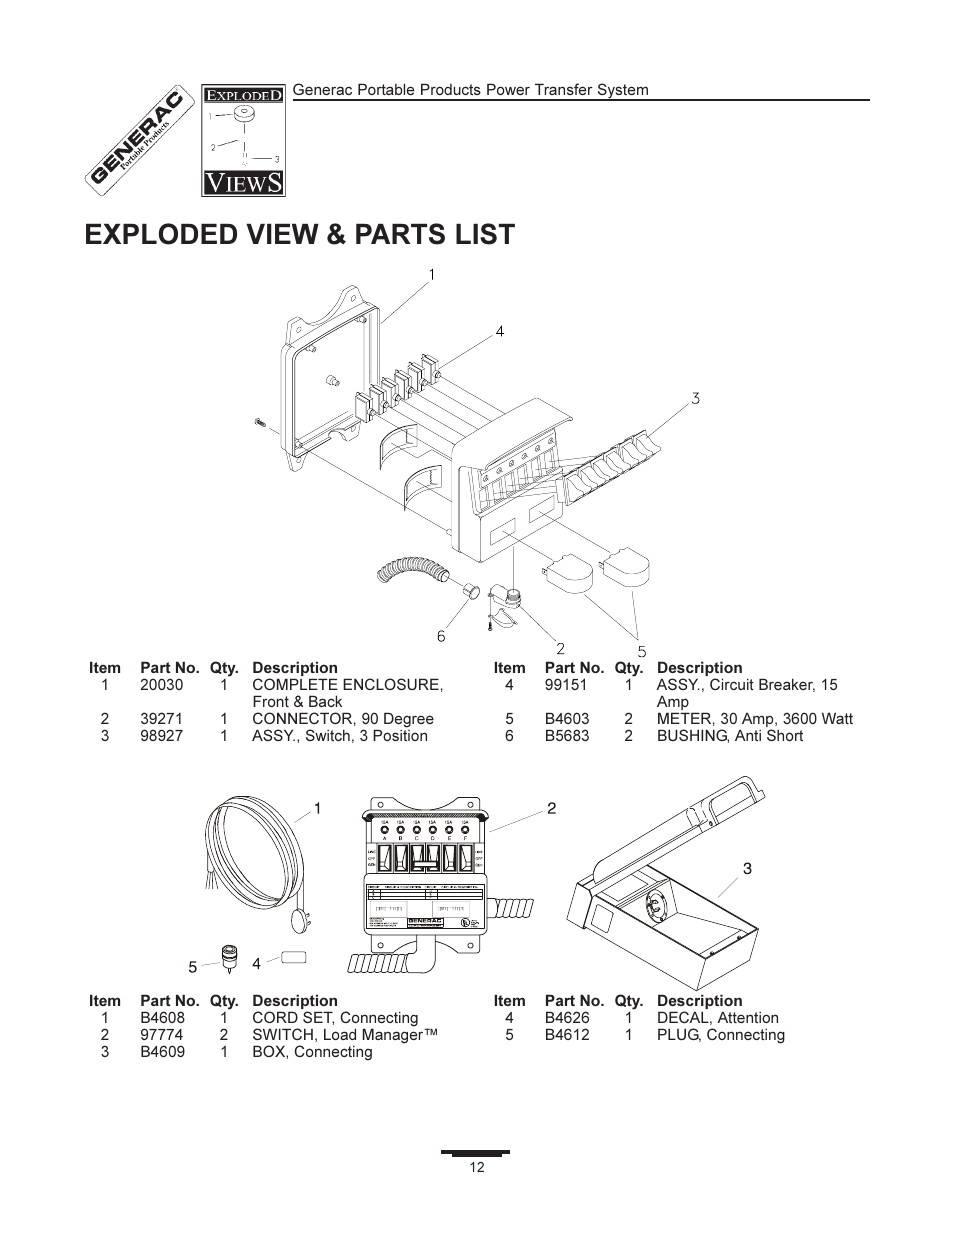 Exploded view & parts list | Generac 1403-0 User Manual | Page 12 / 16